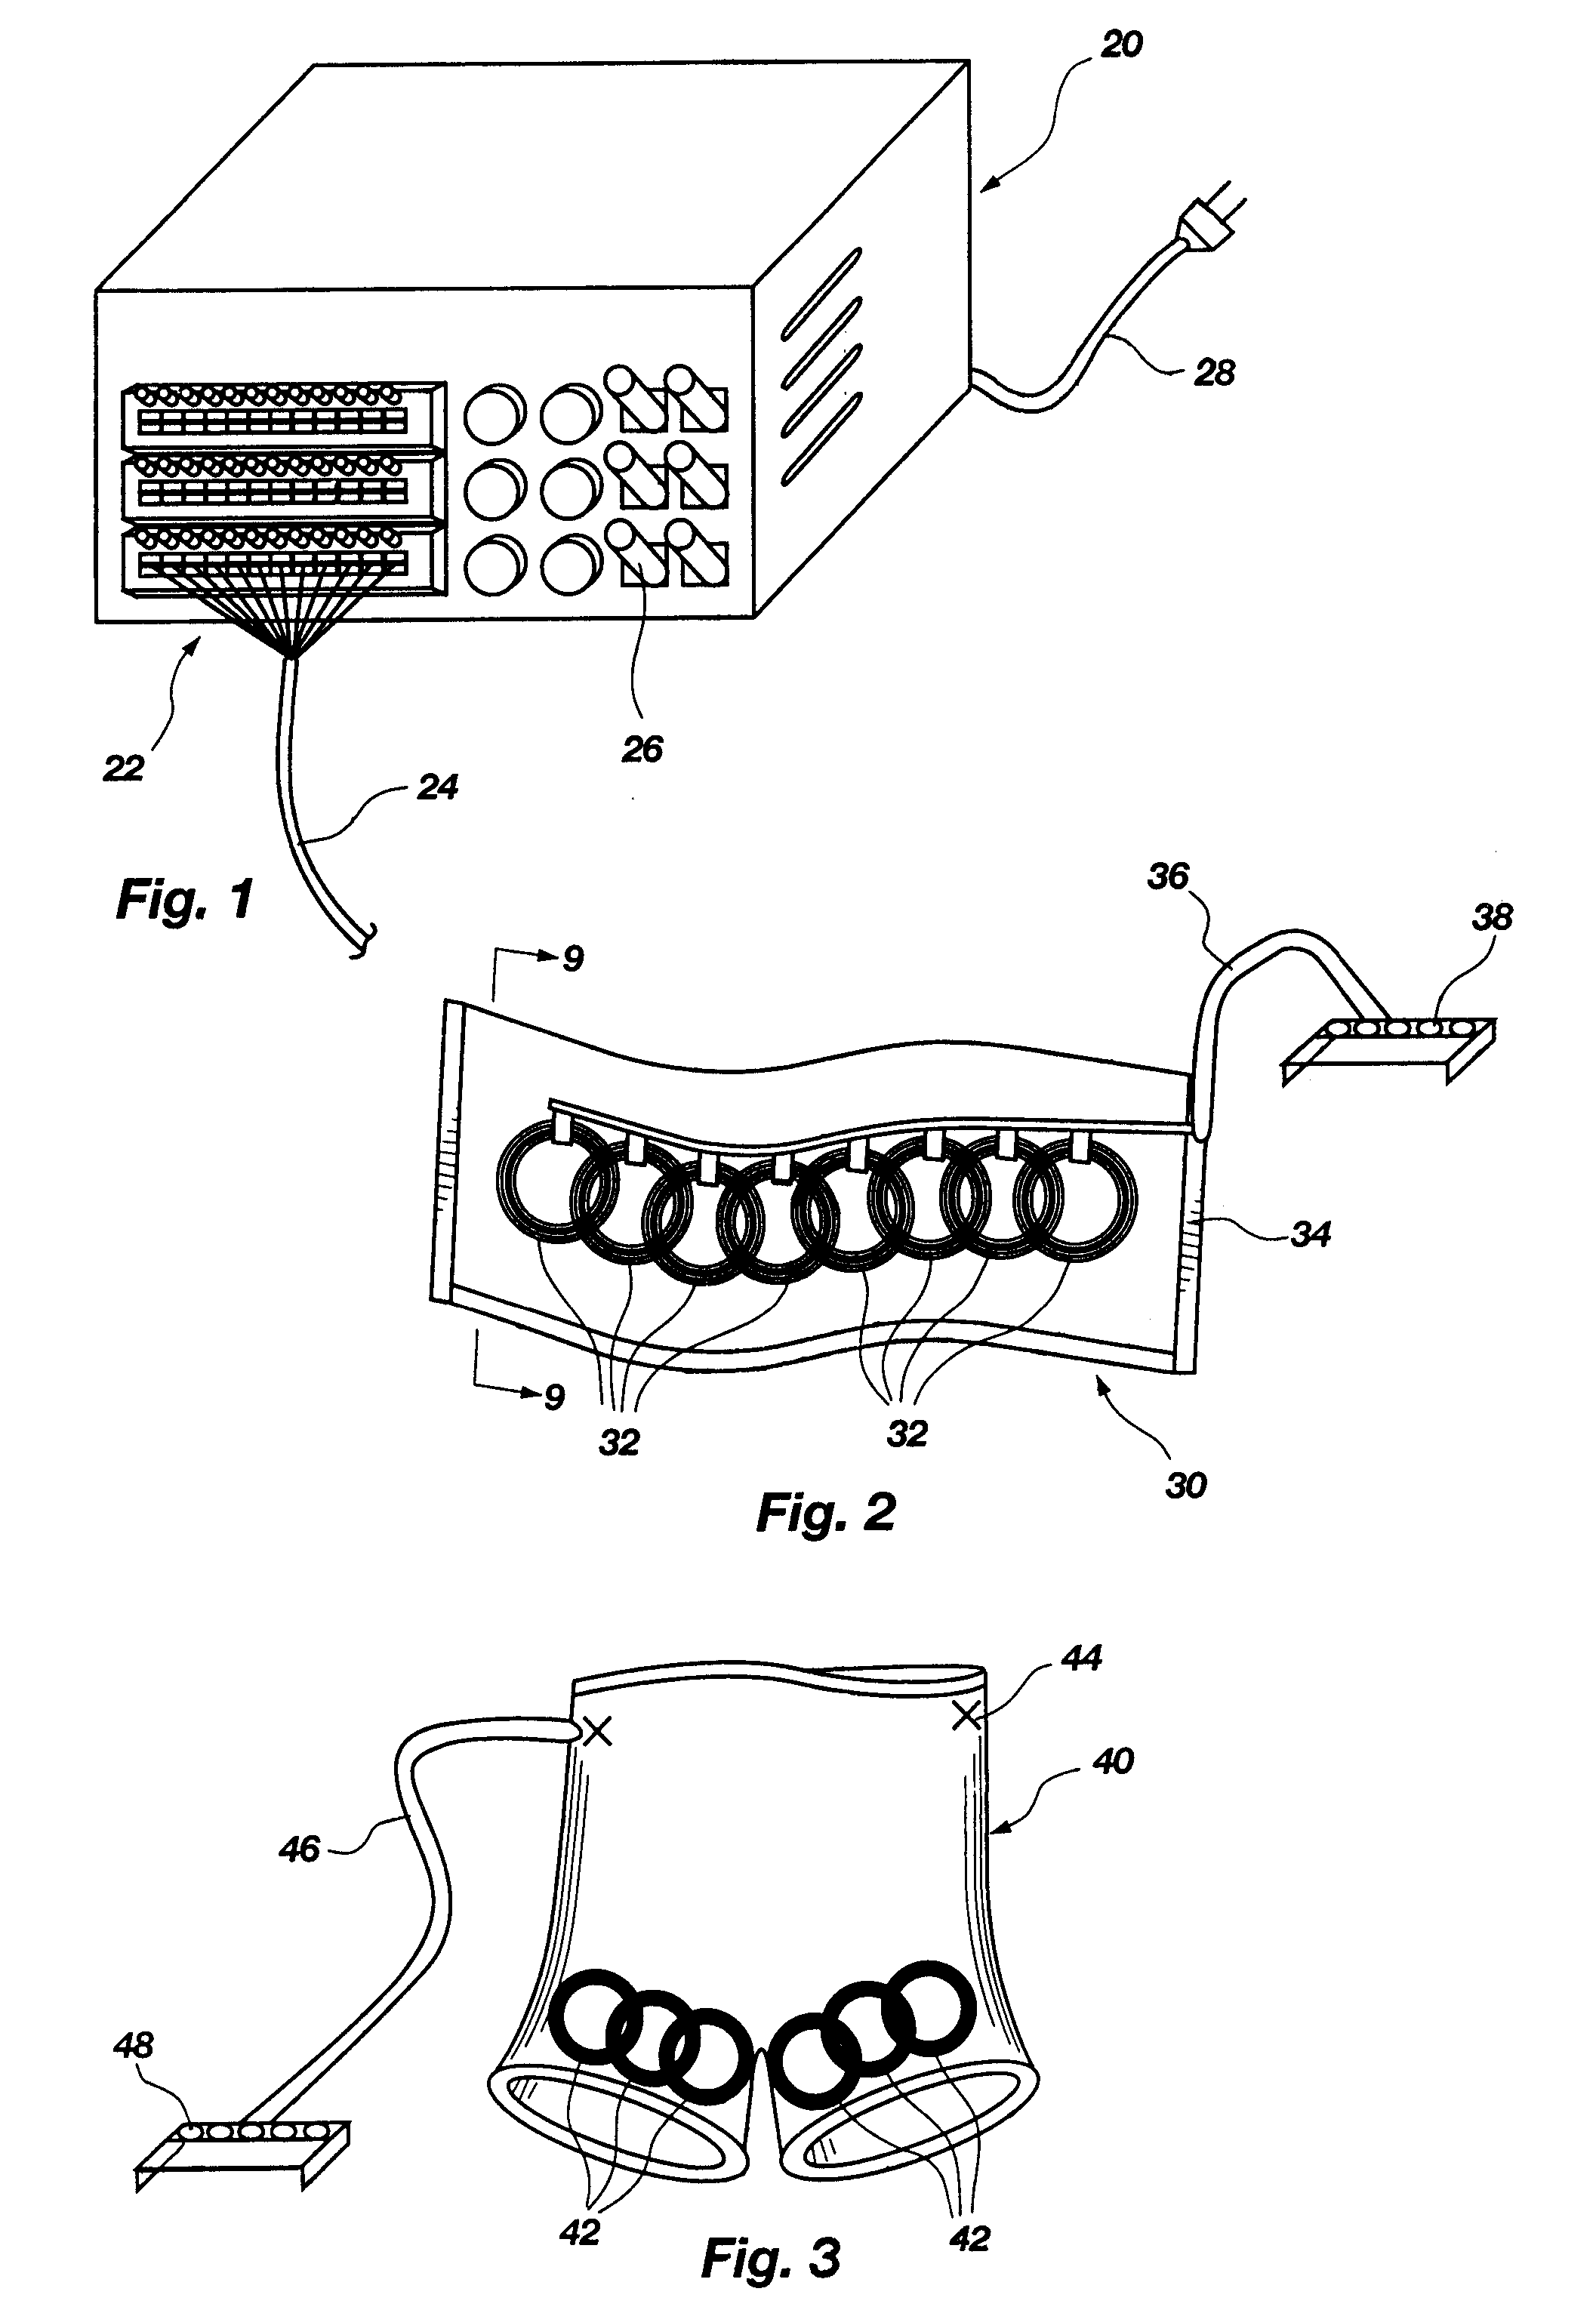 Method and apparatus for electromagnetic stimulation of nerve, muscle, and body tissues